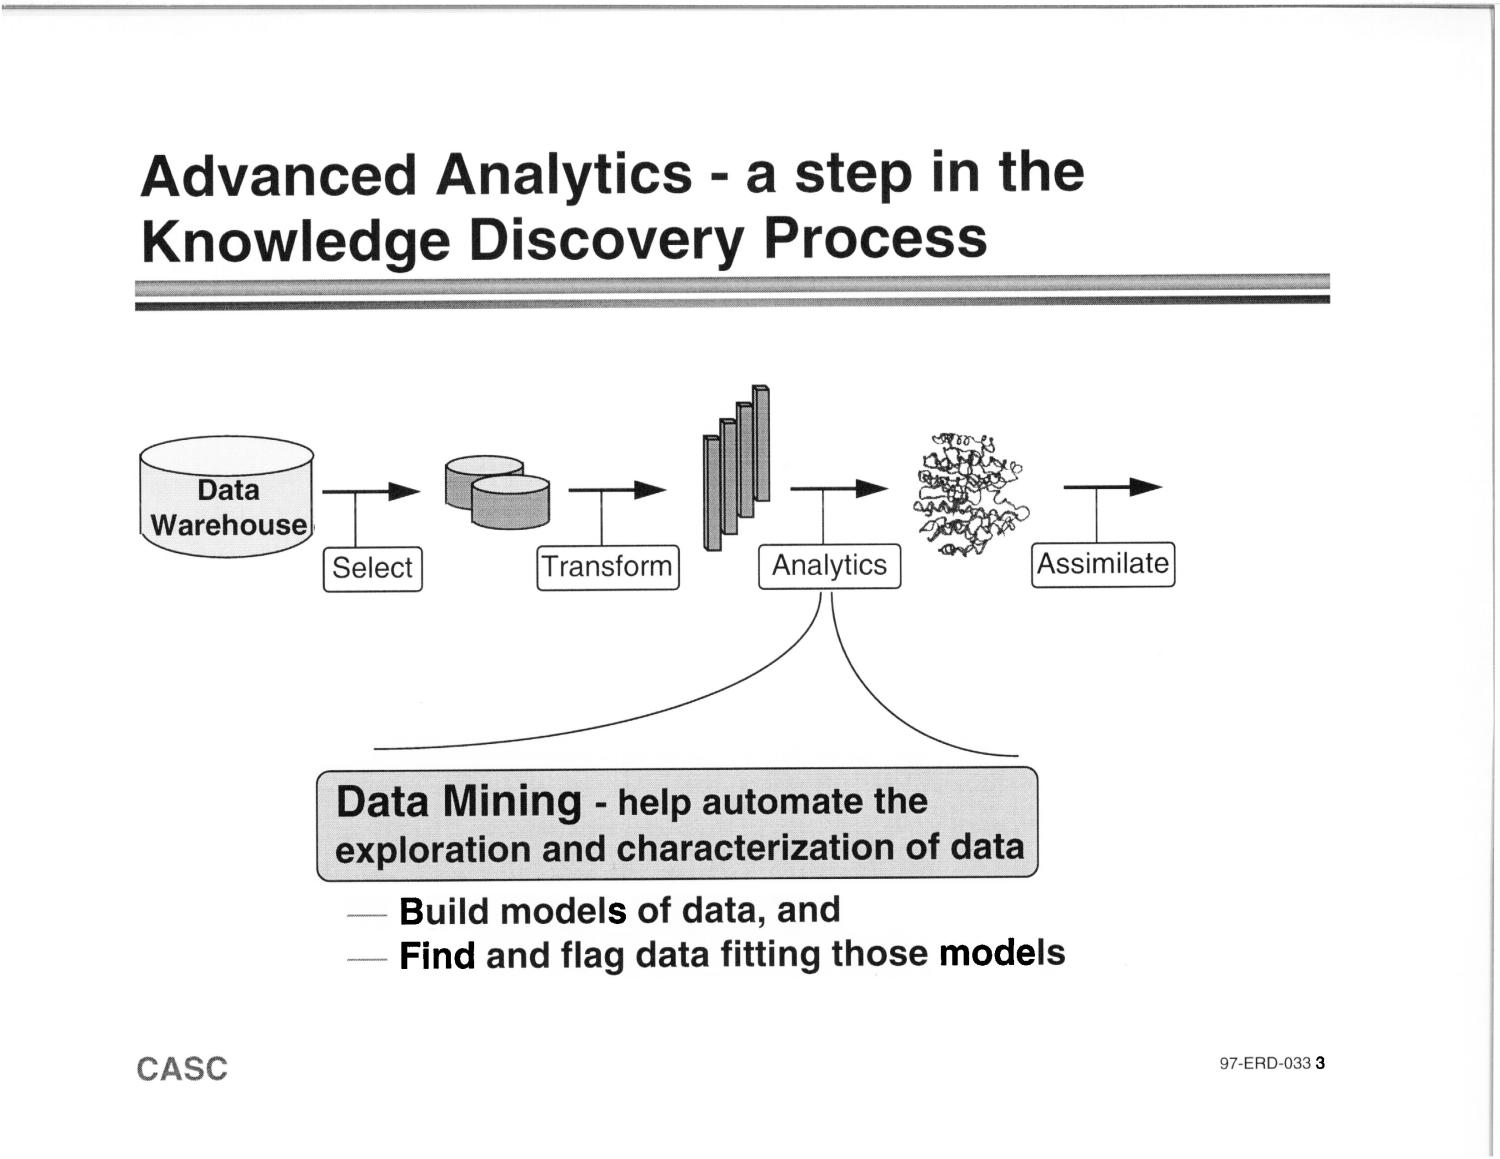 Large-scale data mining pilot project in human genome
                                                
                                                    [Sequence #]: 11 of 22
                                                